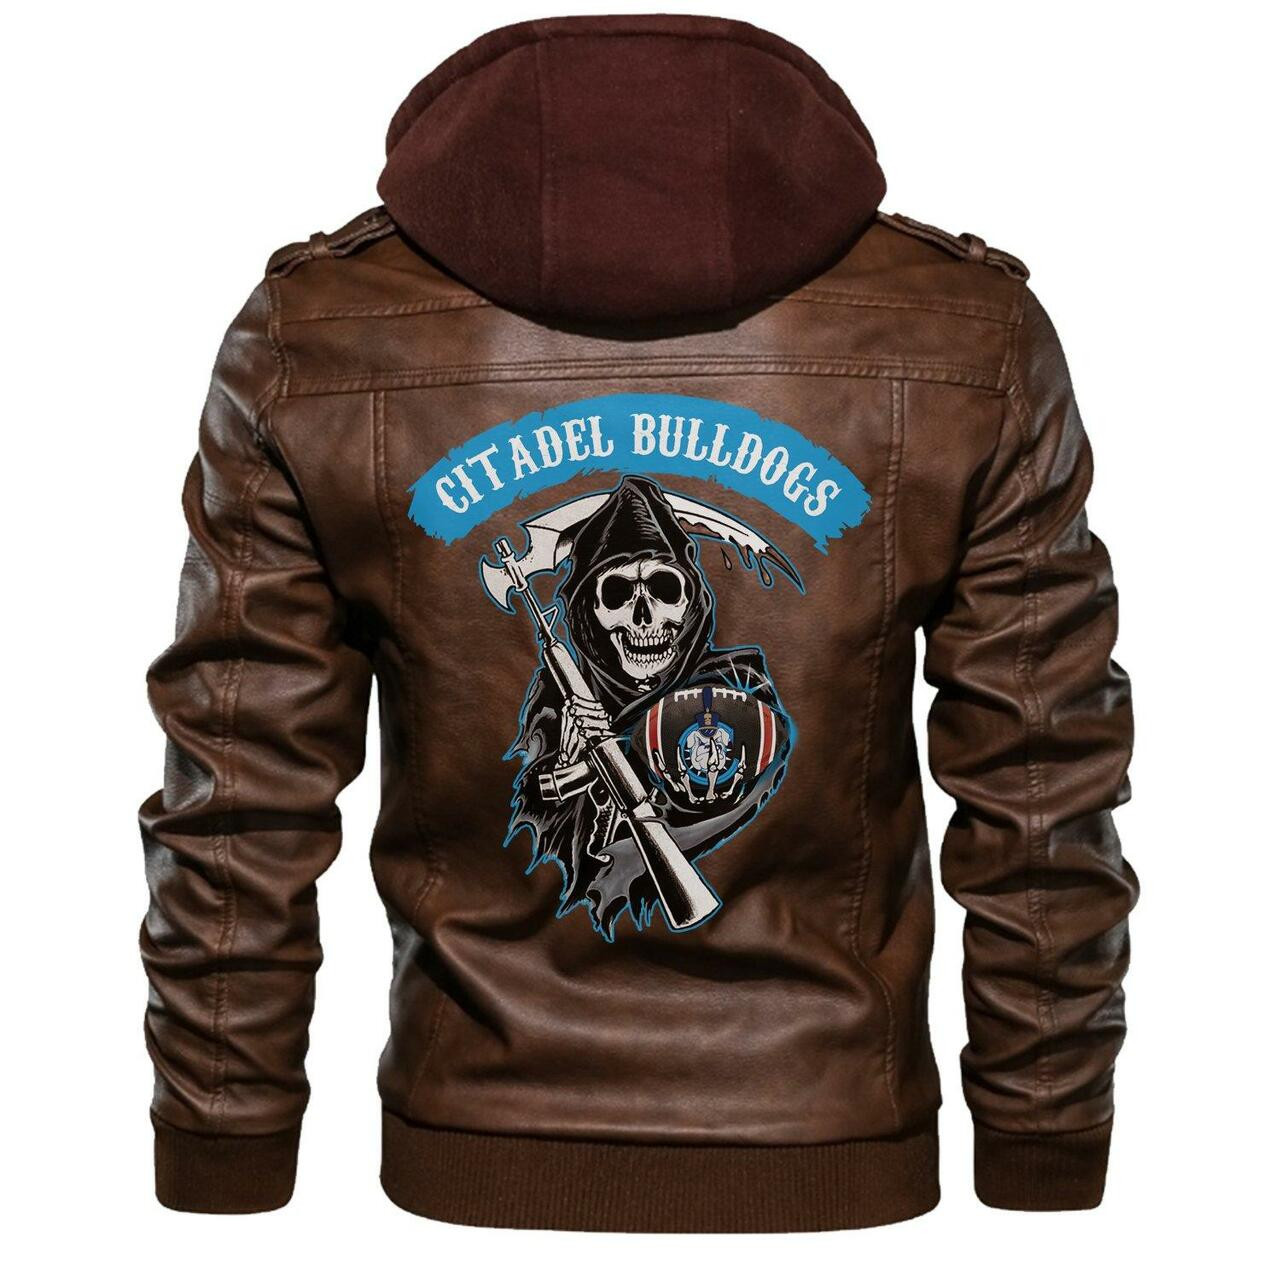 You'll get the best Leather Jacket by shopping online 62